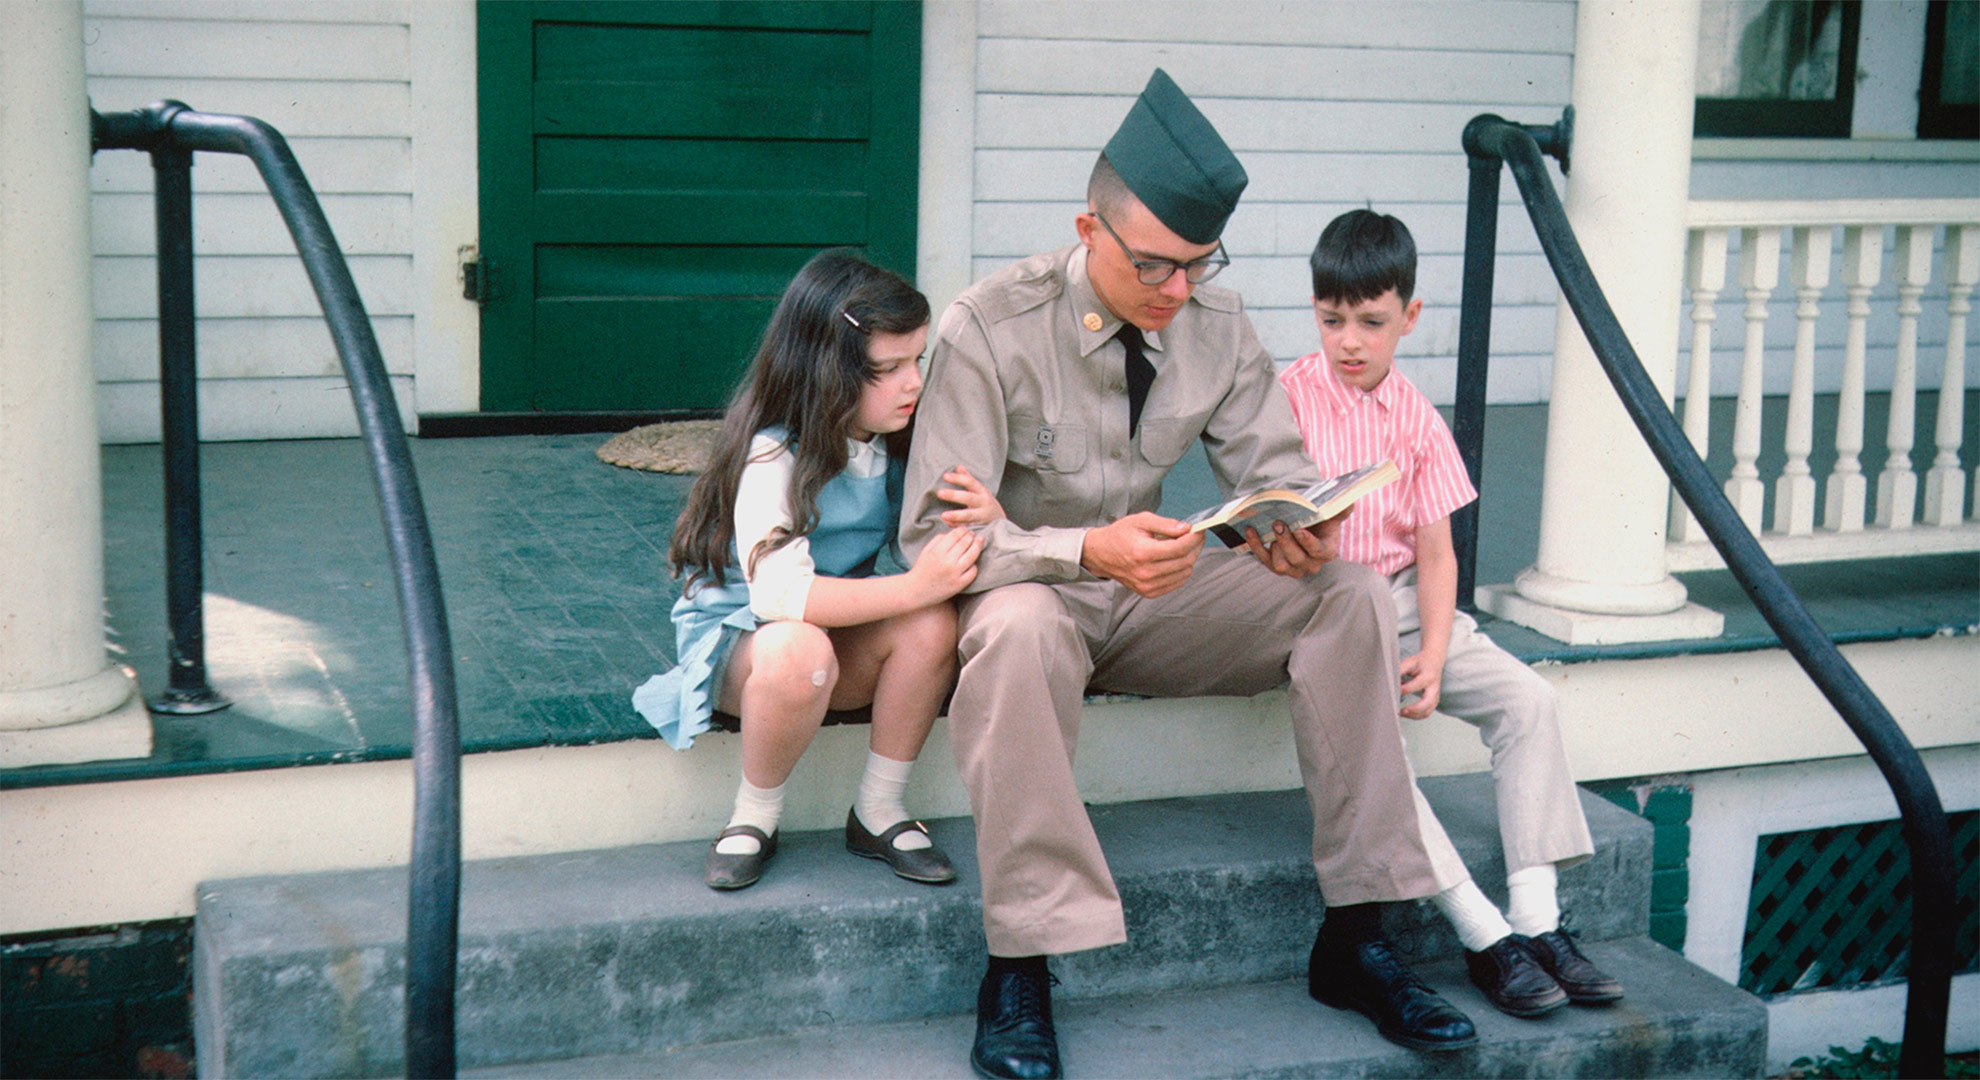 American soldier with his siblings before leaving for Vietnam. 1965.